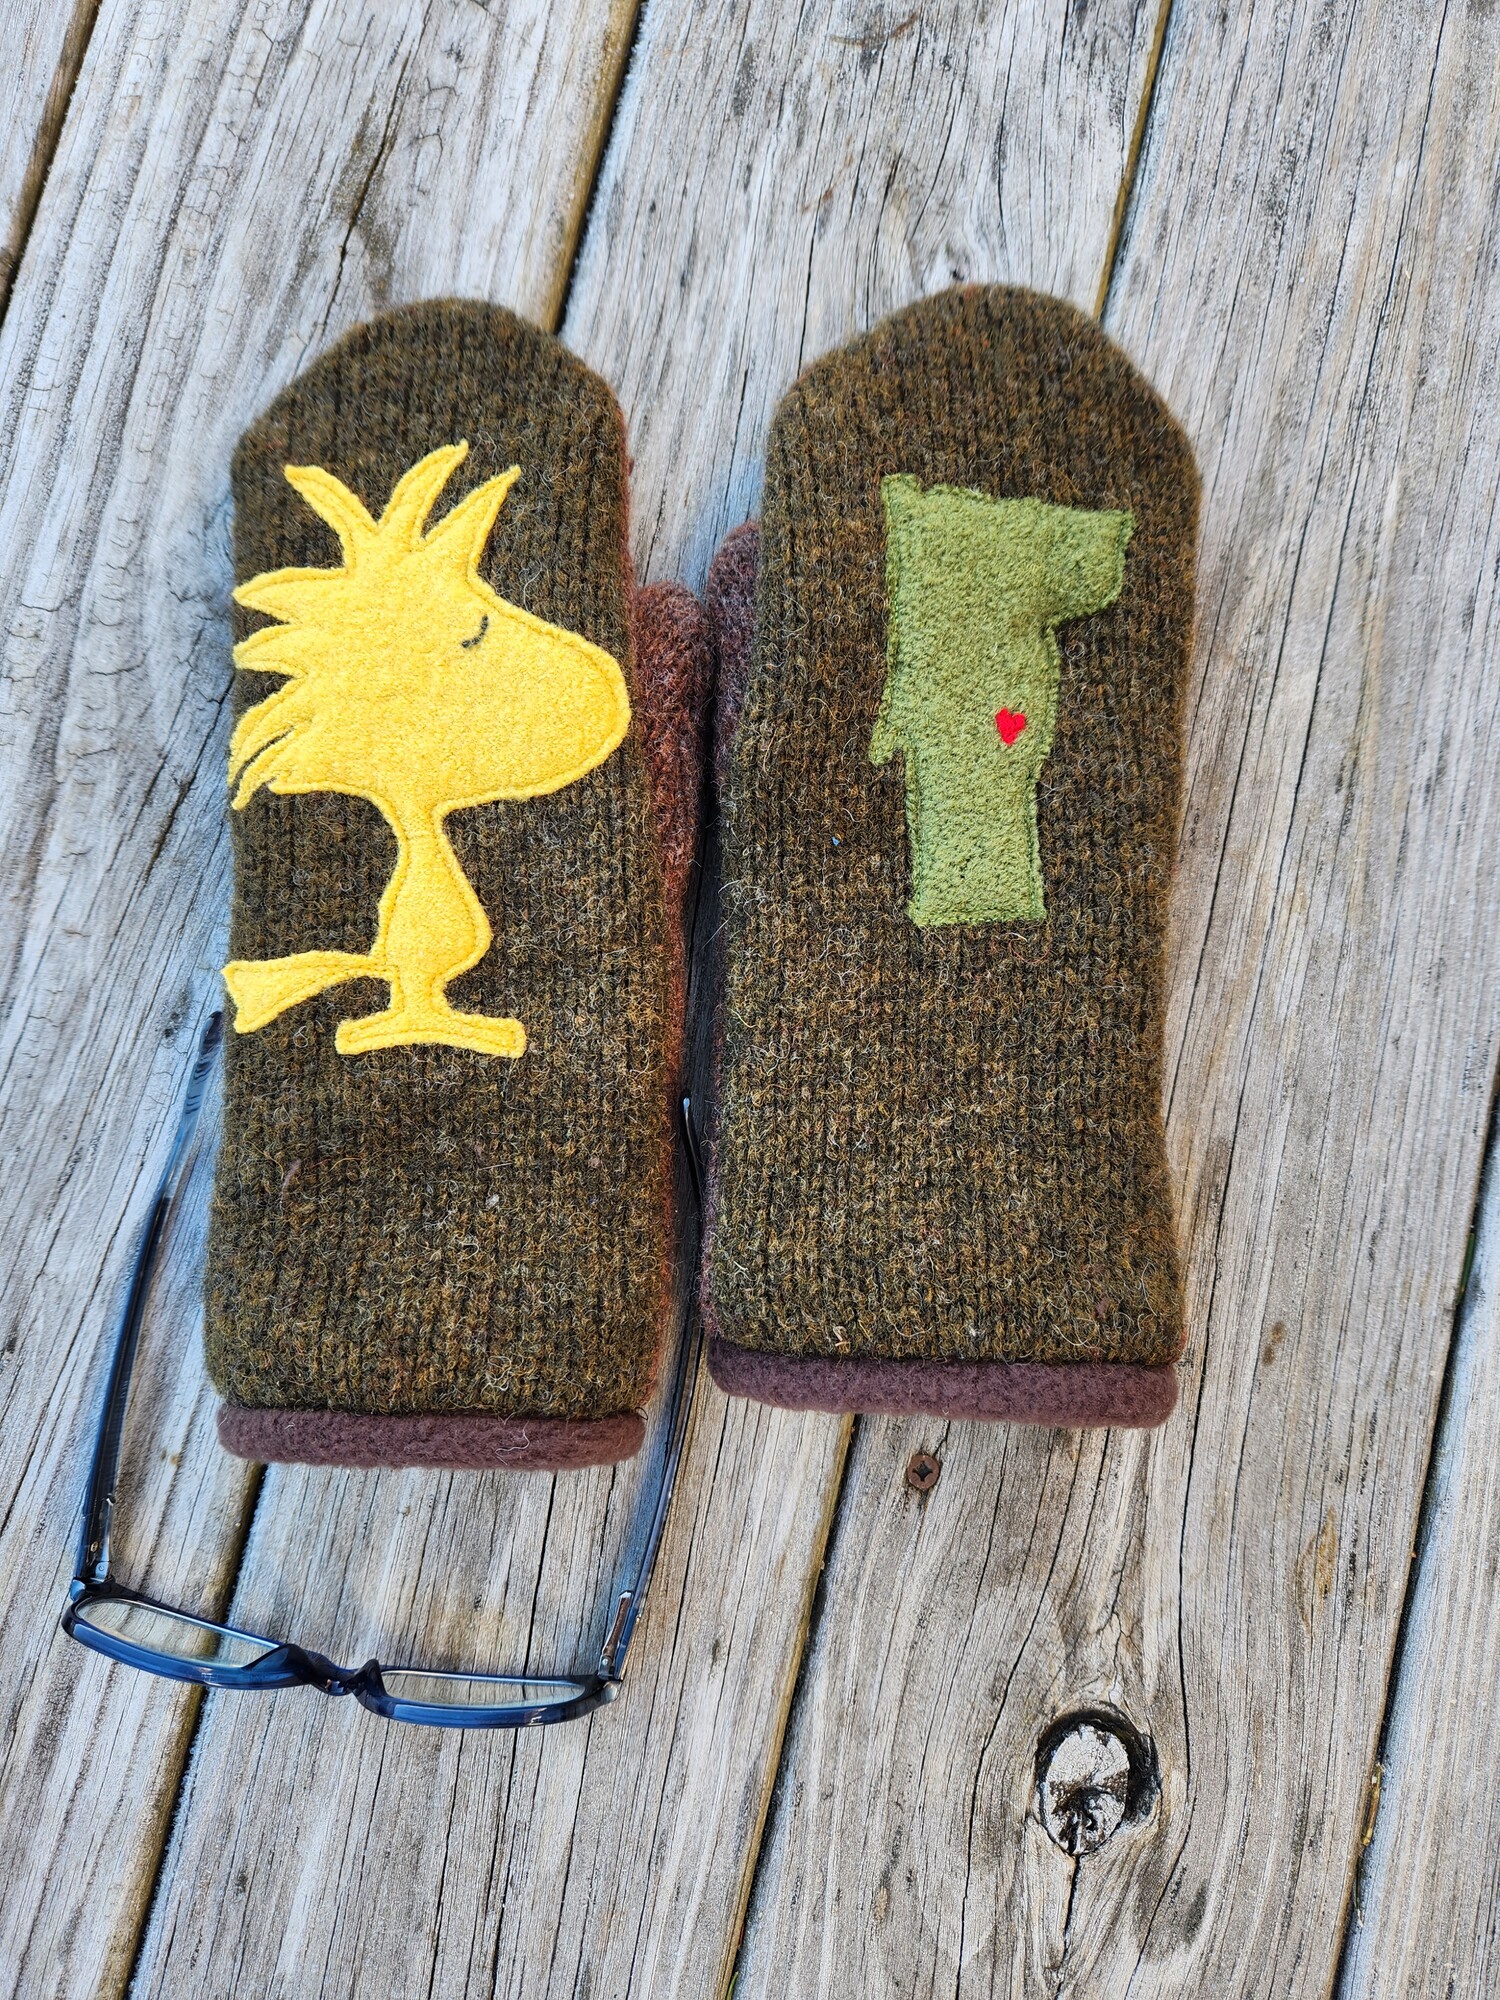 WOODY & VT,
RECYCLED MITTENS OUT OF SWEATERS
 Size: Large